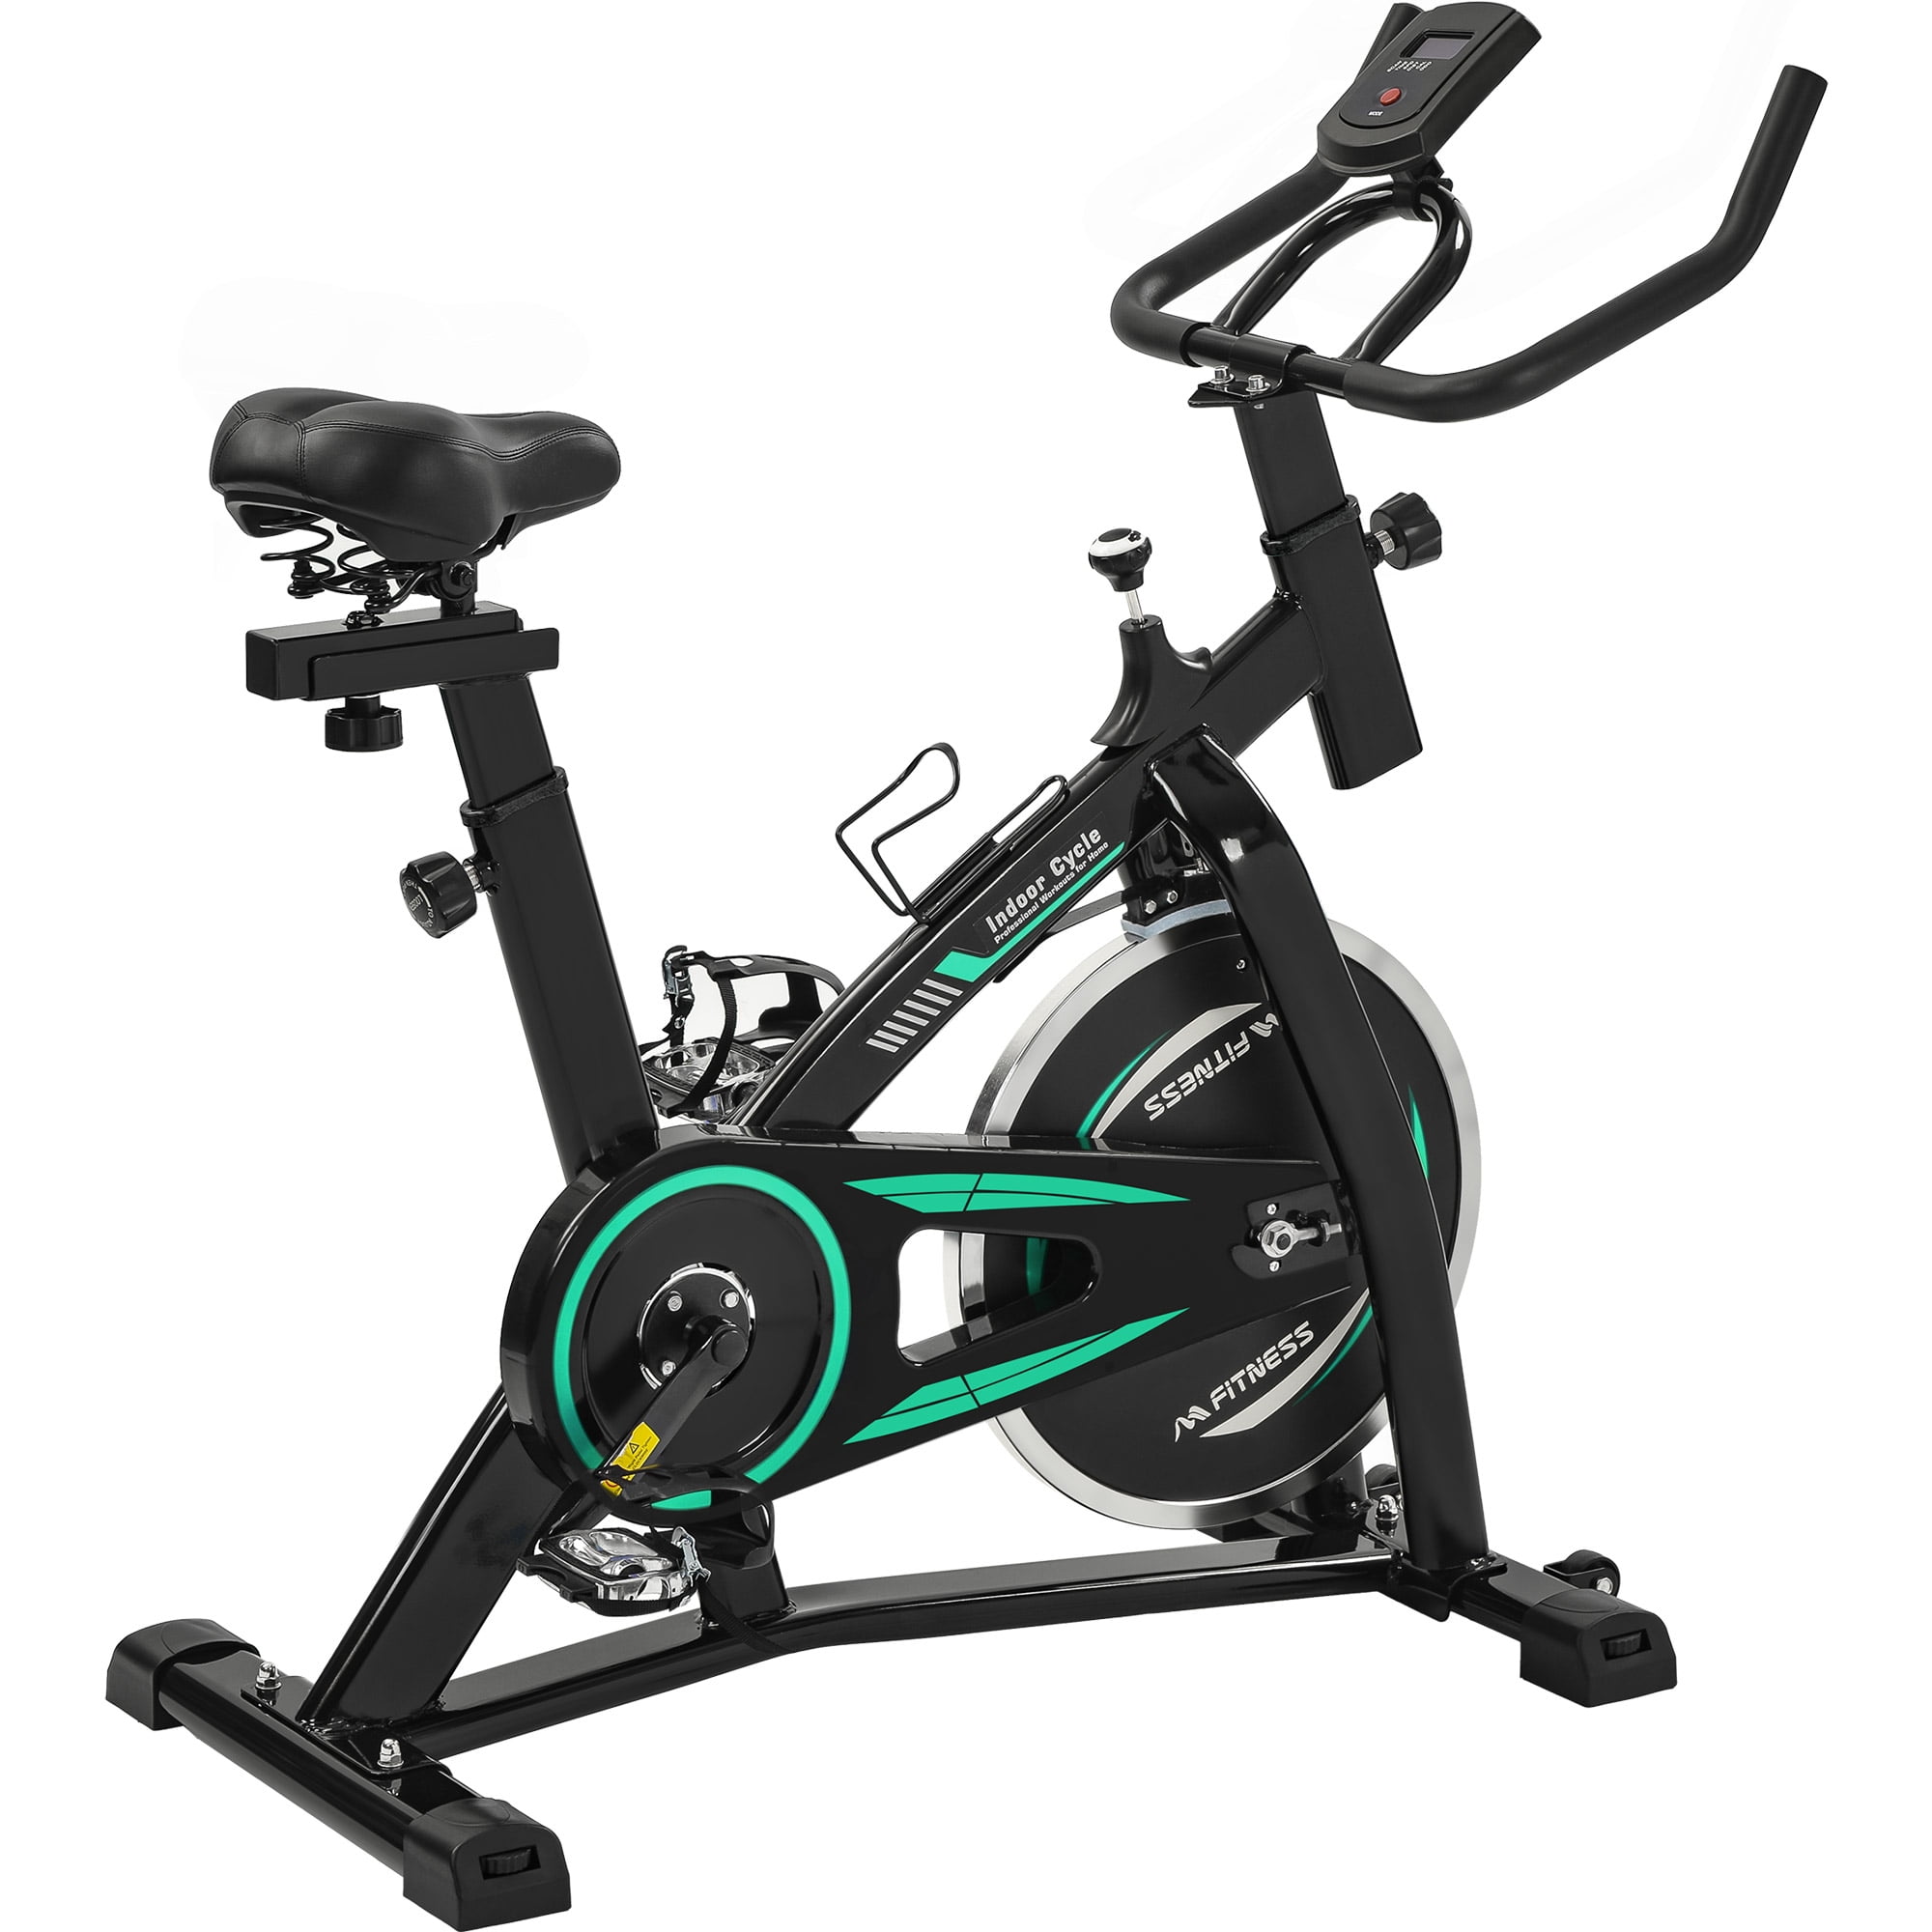 Exercise Bikes Indoor Cycling Bike Bicycle Home Fitness Workout Cardio Machines